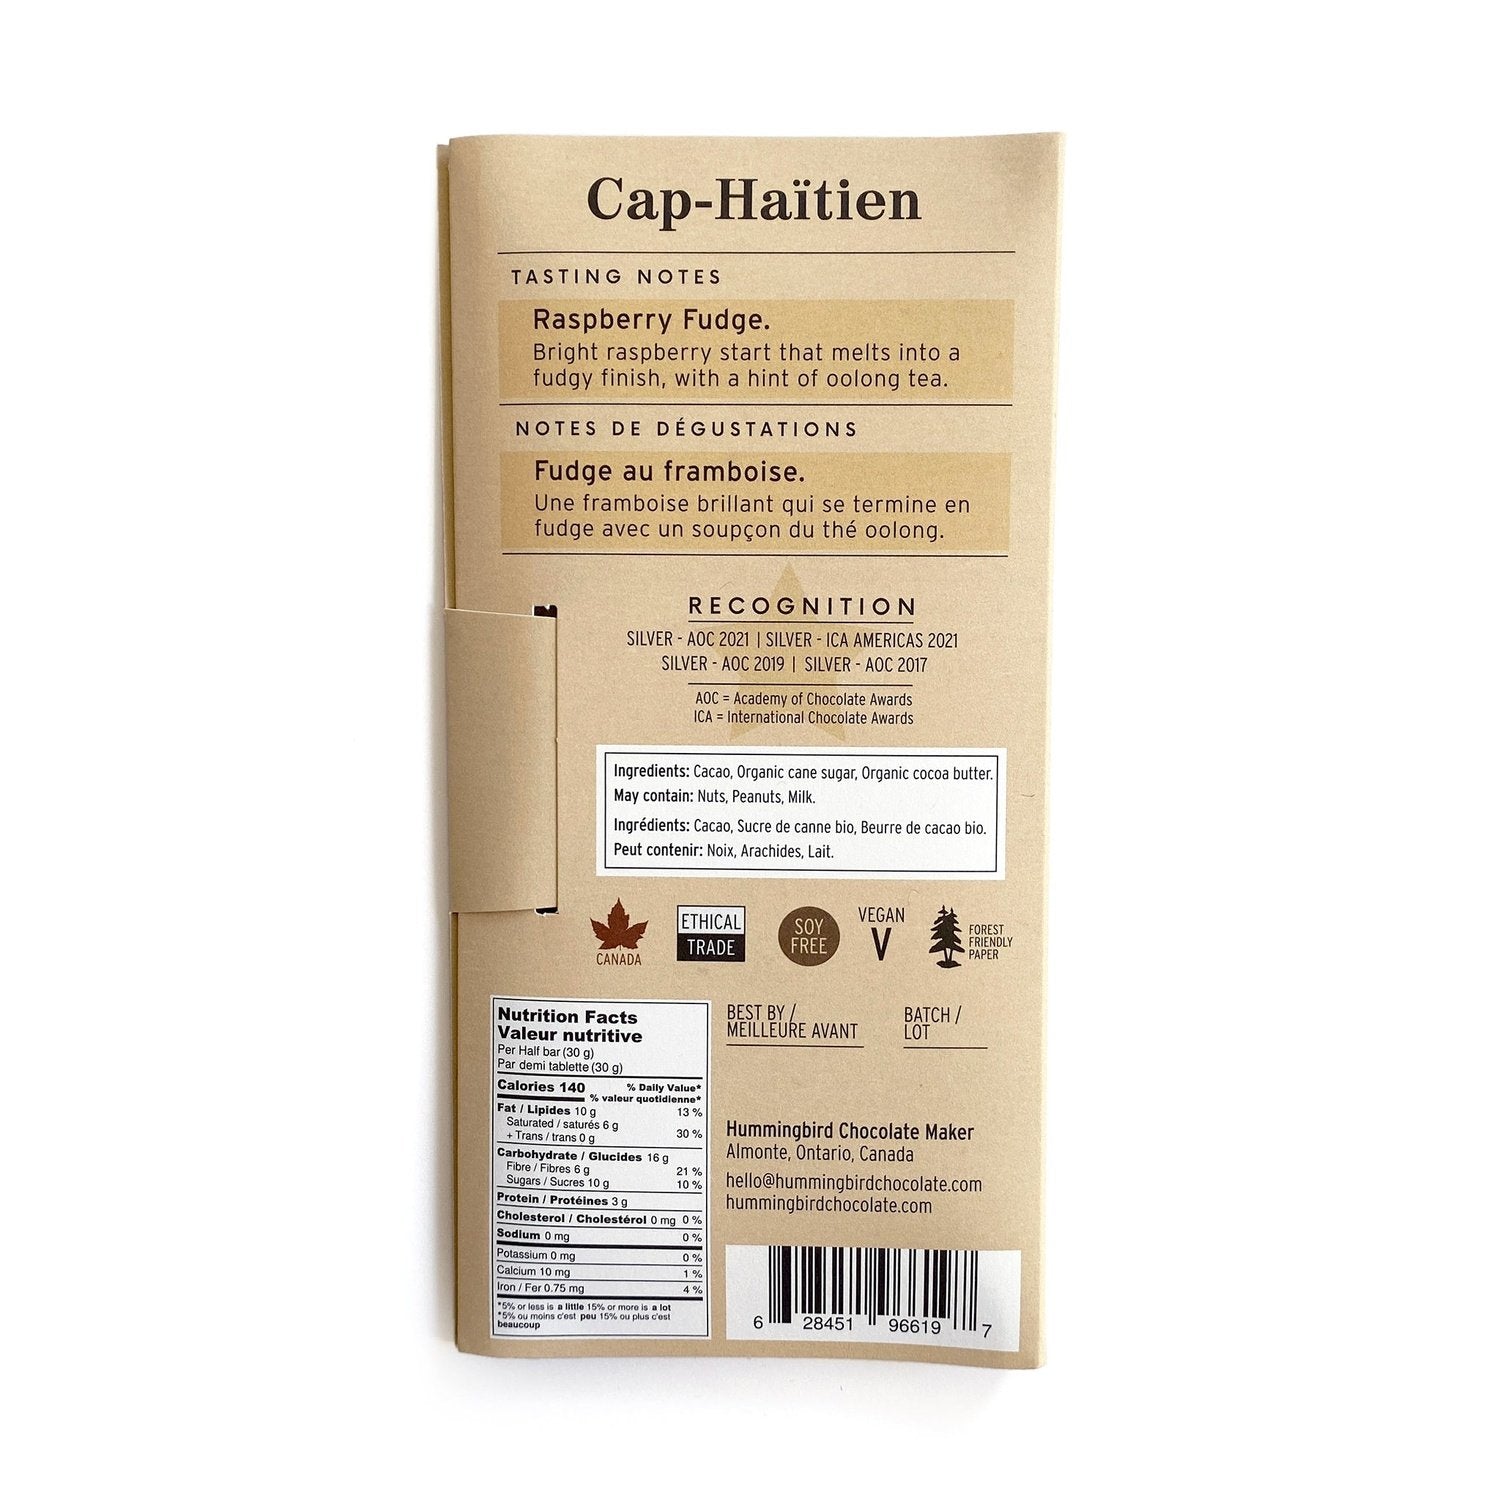 Back label of Cap-Haitien dark chocolate bar, including tasting notes, award winning chocolate, ingredients and nutritional information